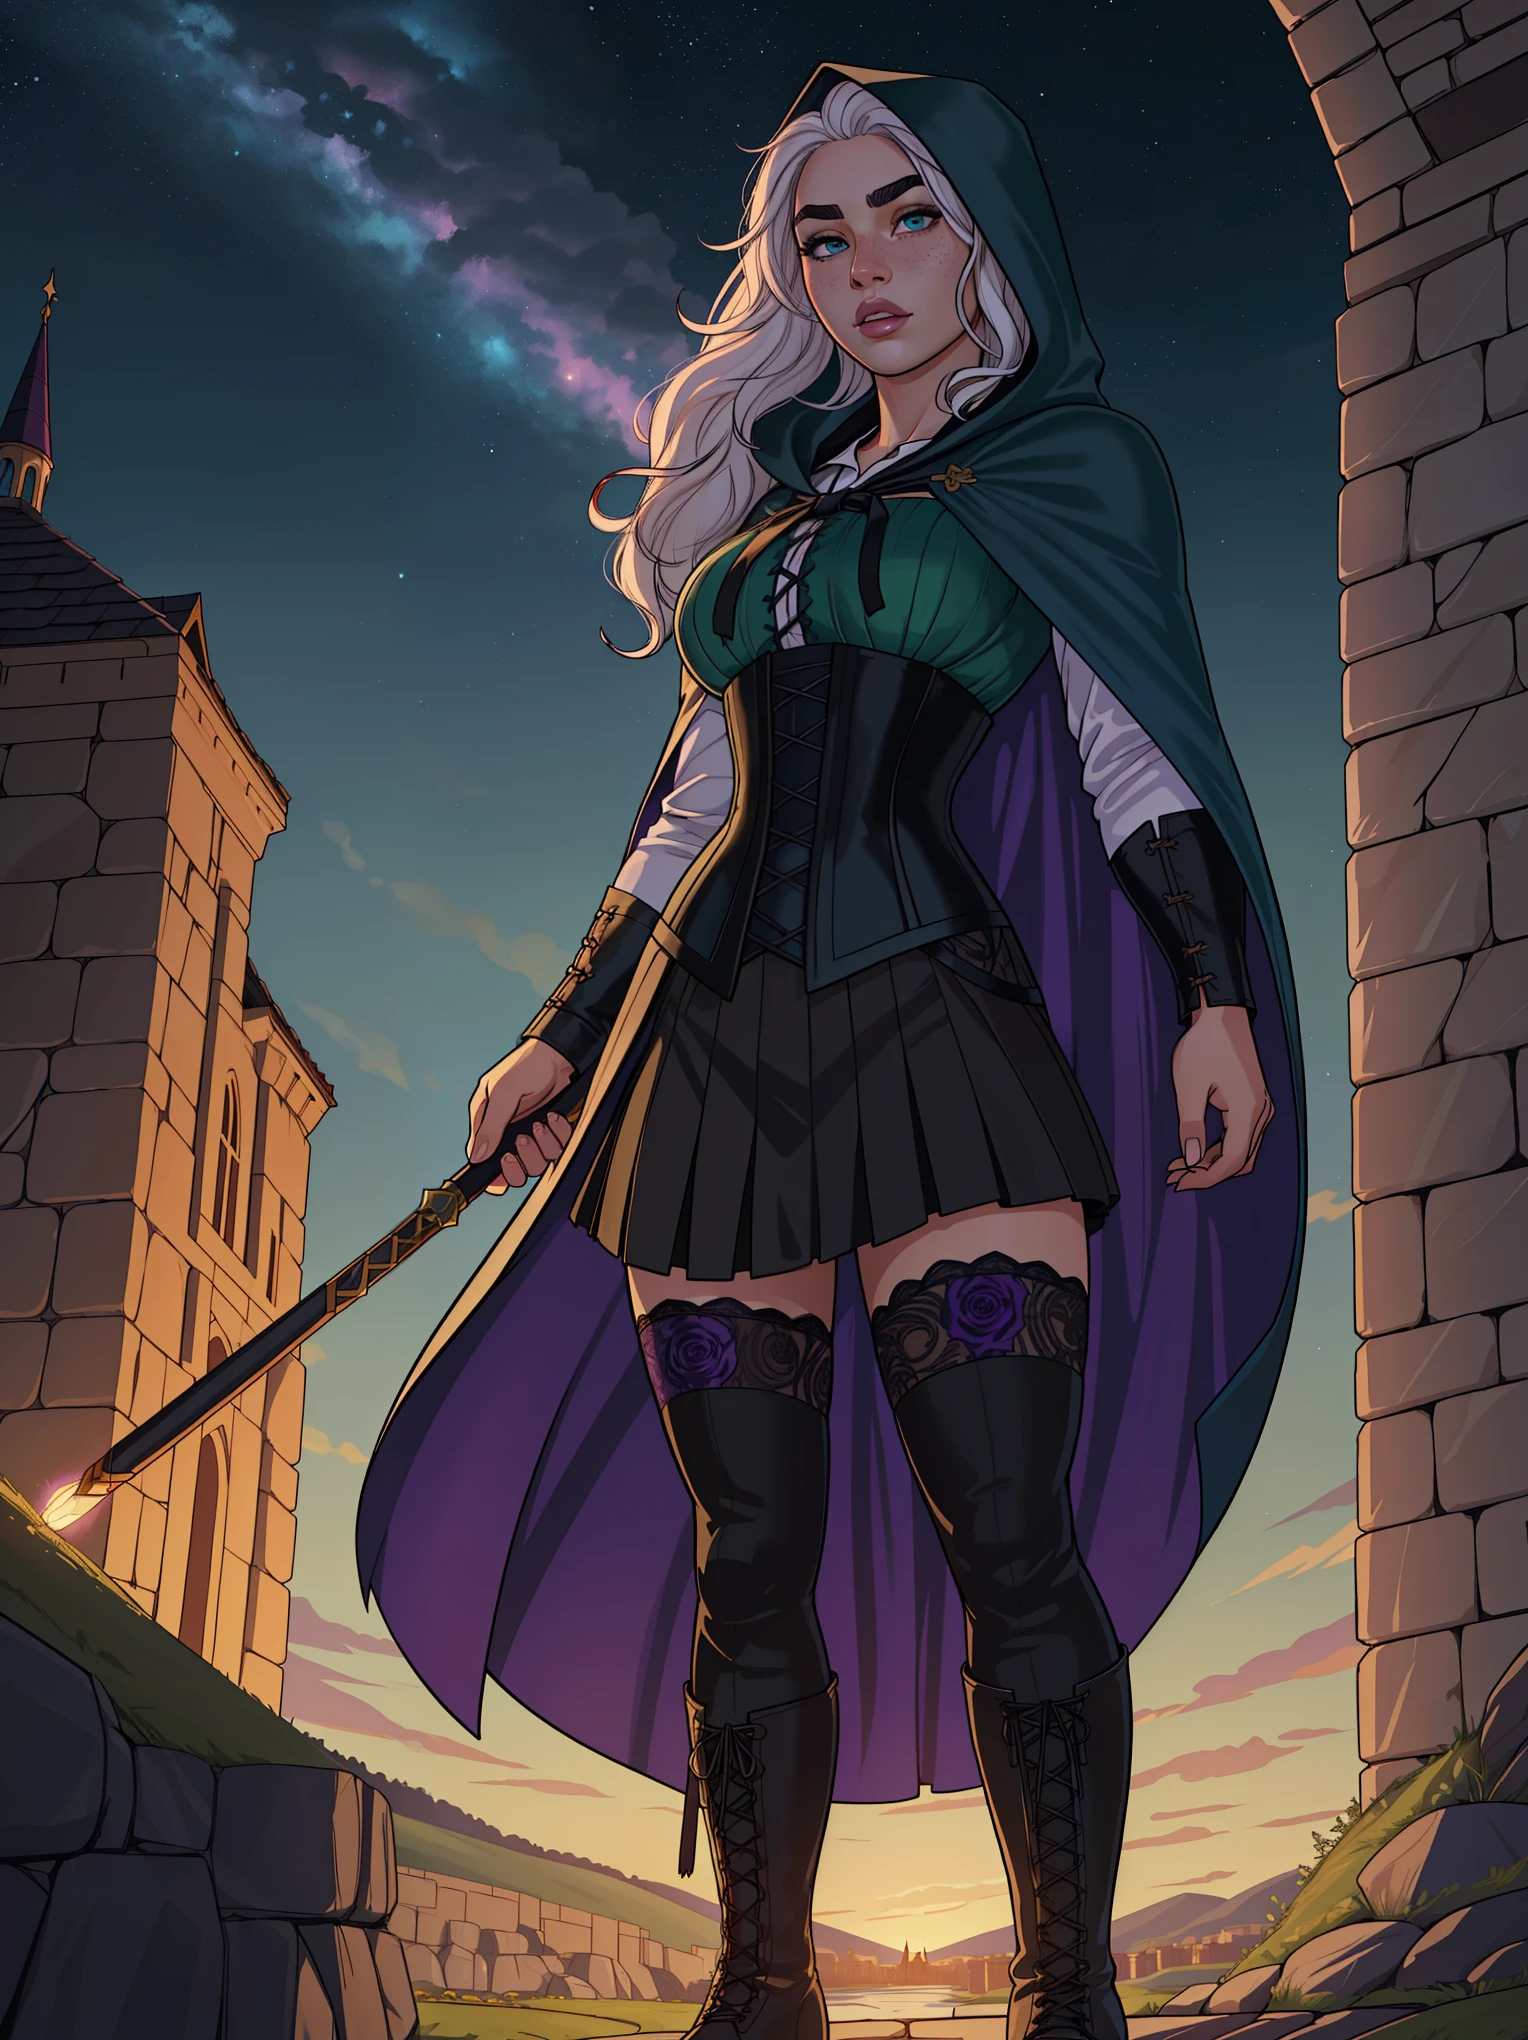 Solo, human, 1girl, female, curvy, Young adult, Fair skin, Wavy White Hair, hair on shoulders, (freckles:0.9), heterochromia eyes, green eye, purple eye, glowing eyes, eyebrows, eyebrow cut, thin lips, bow lips, black combat skirt, hooded cloak, blue cloak, corset, collard shirt, opaque lace stockings, combat boots, (by JJGG, by Chuby Mi, masterpiece,high quality,hi res,8k hd),standing,close-view portrait,looking at viewer,night, outdoor, castle, floating gemstone, gymstone, detailed hair, detailed eyes, rwby rose clothes,